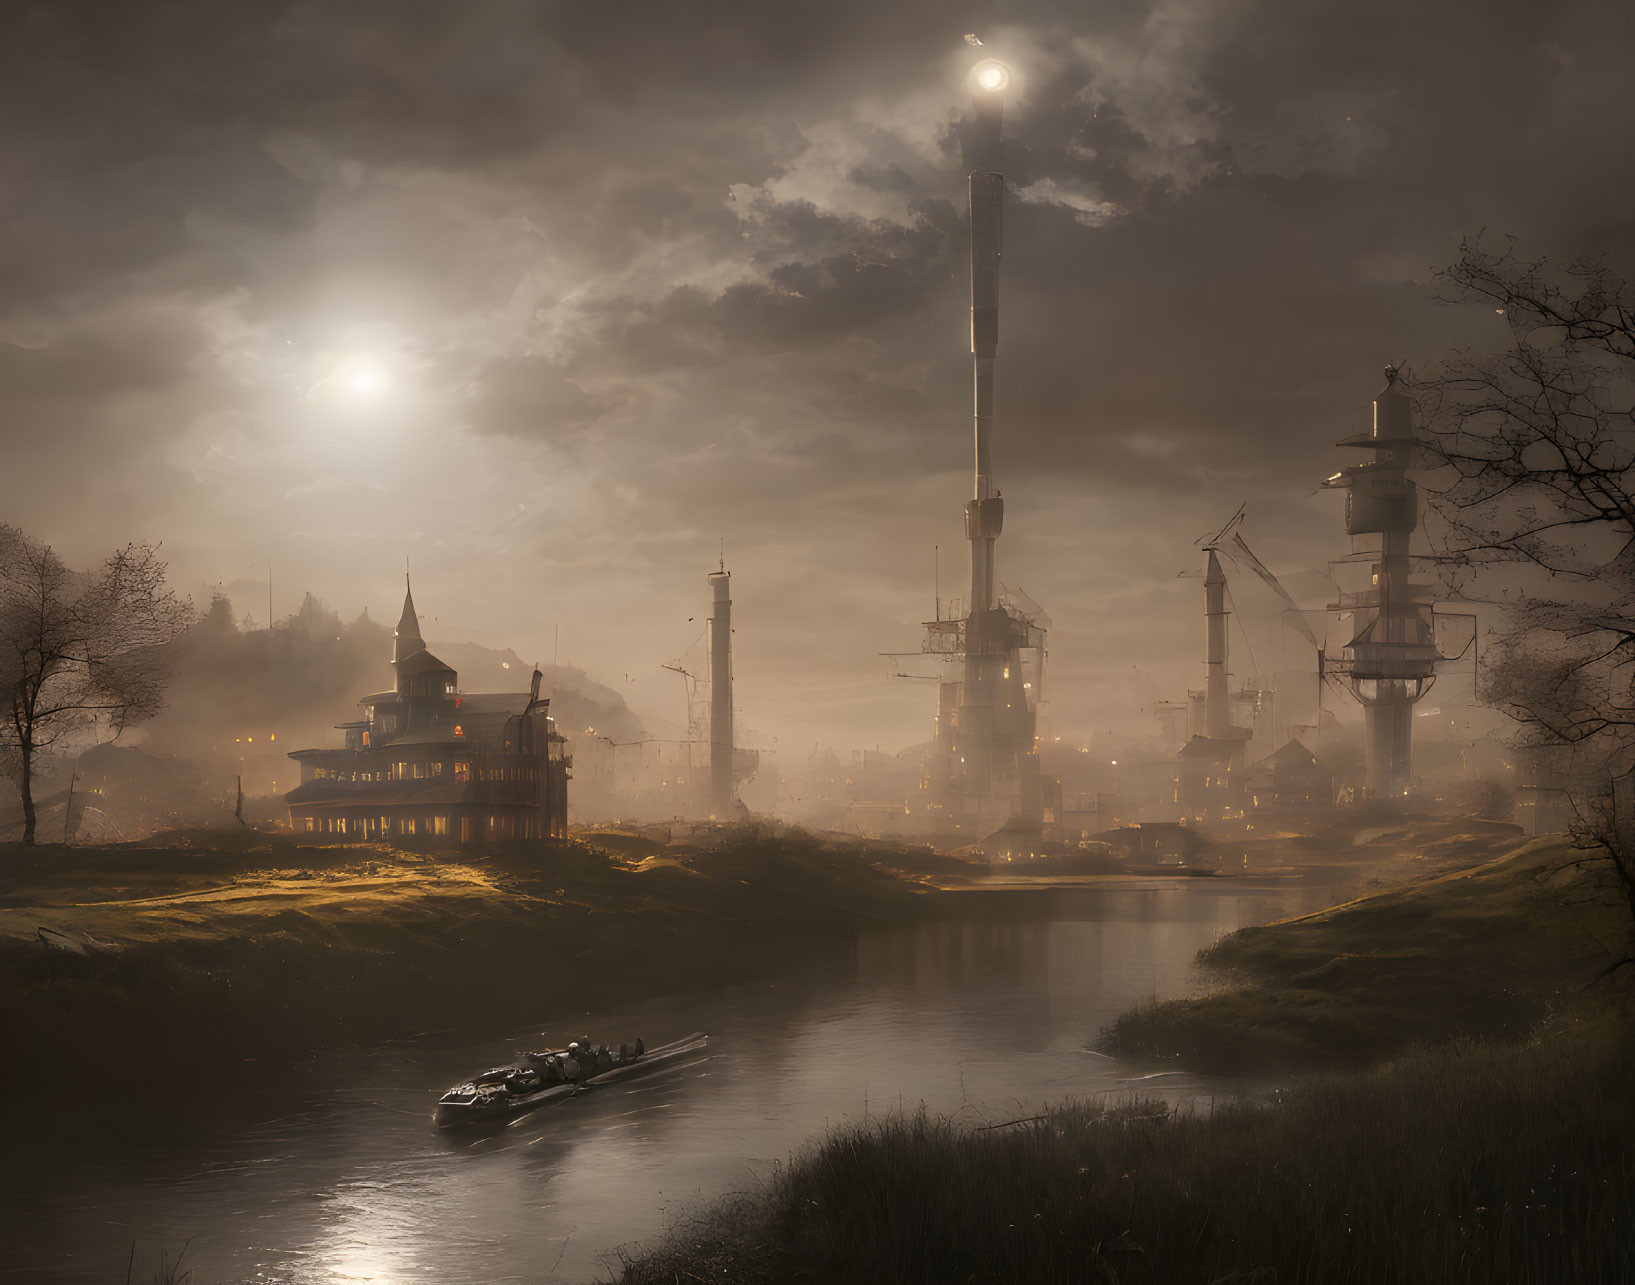 River scene at dusk with traditional and futuristic elements.